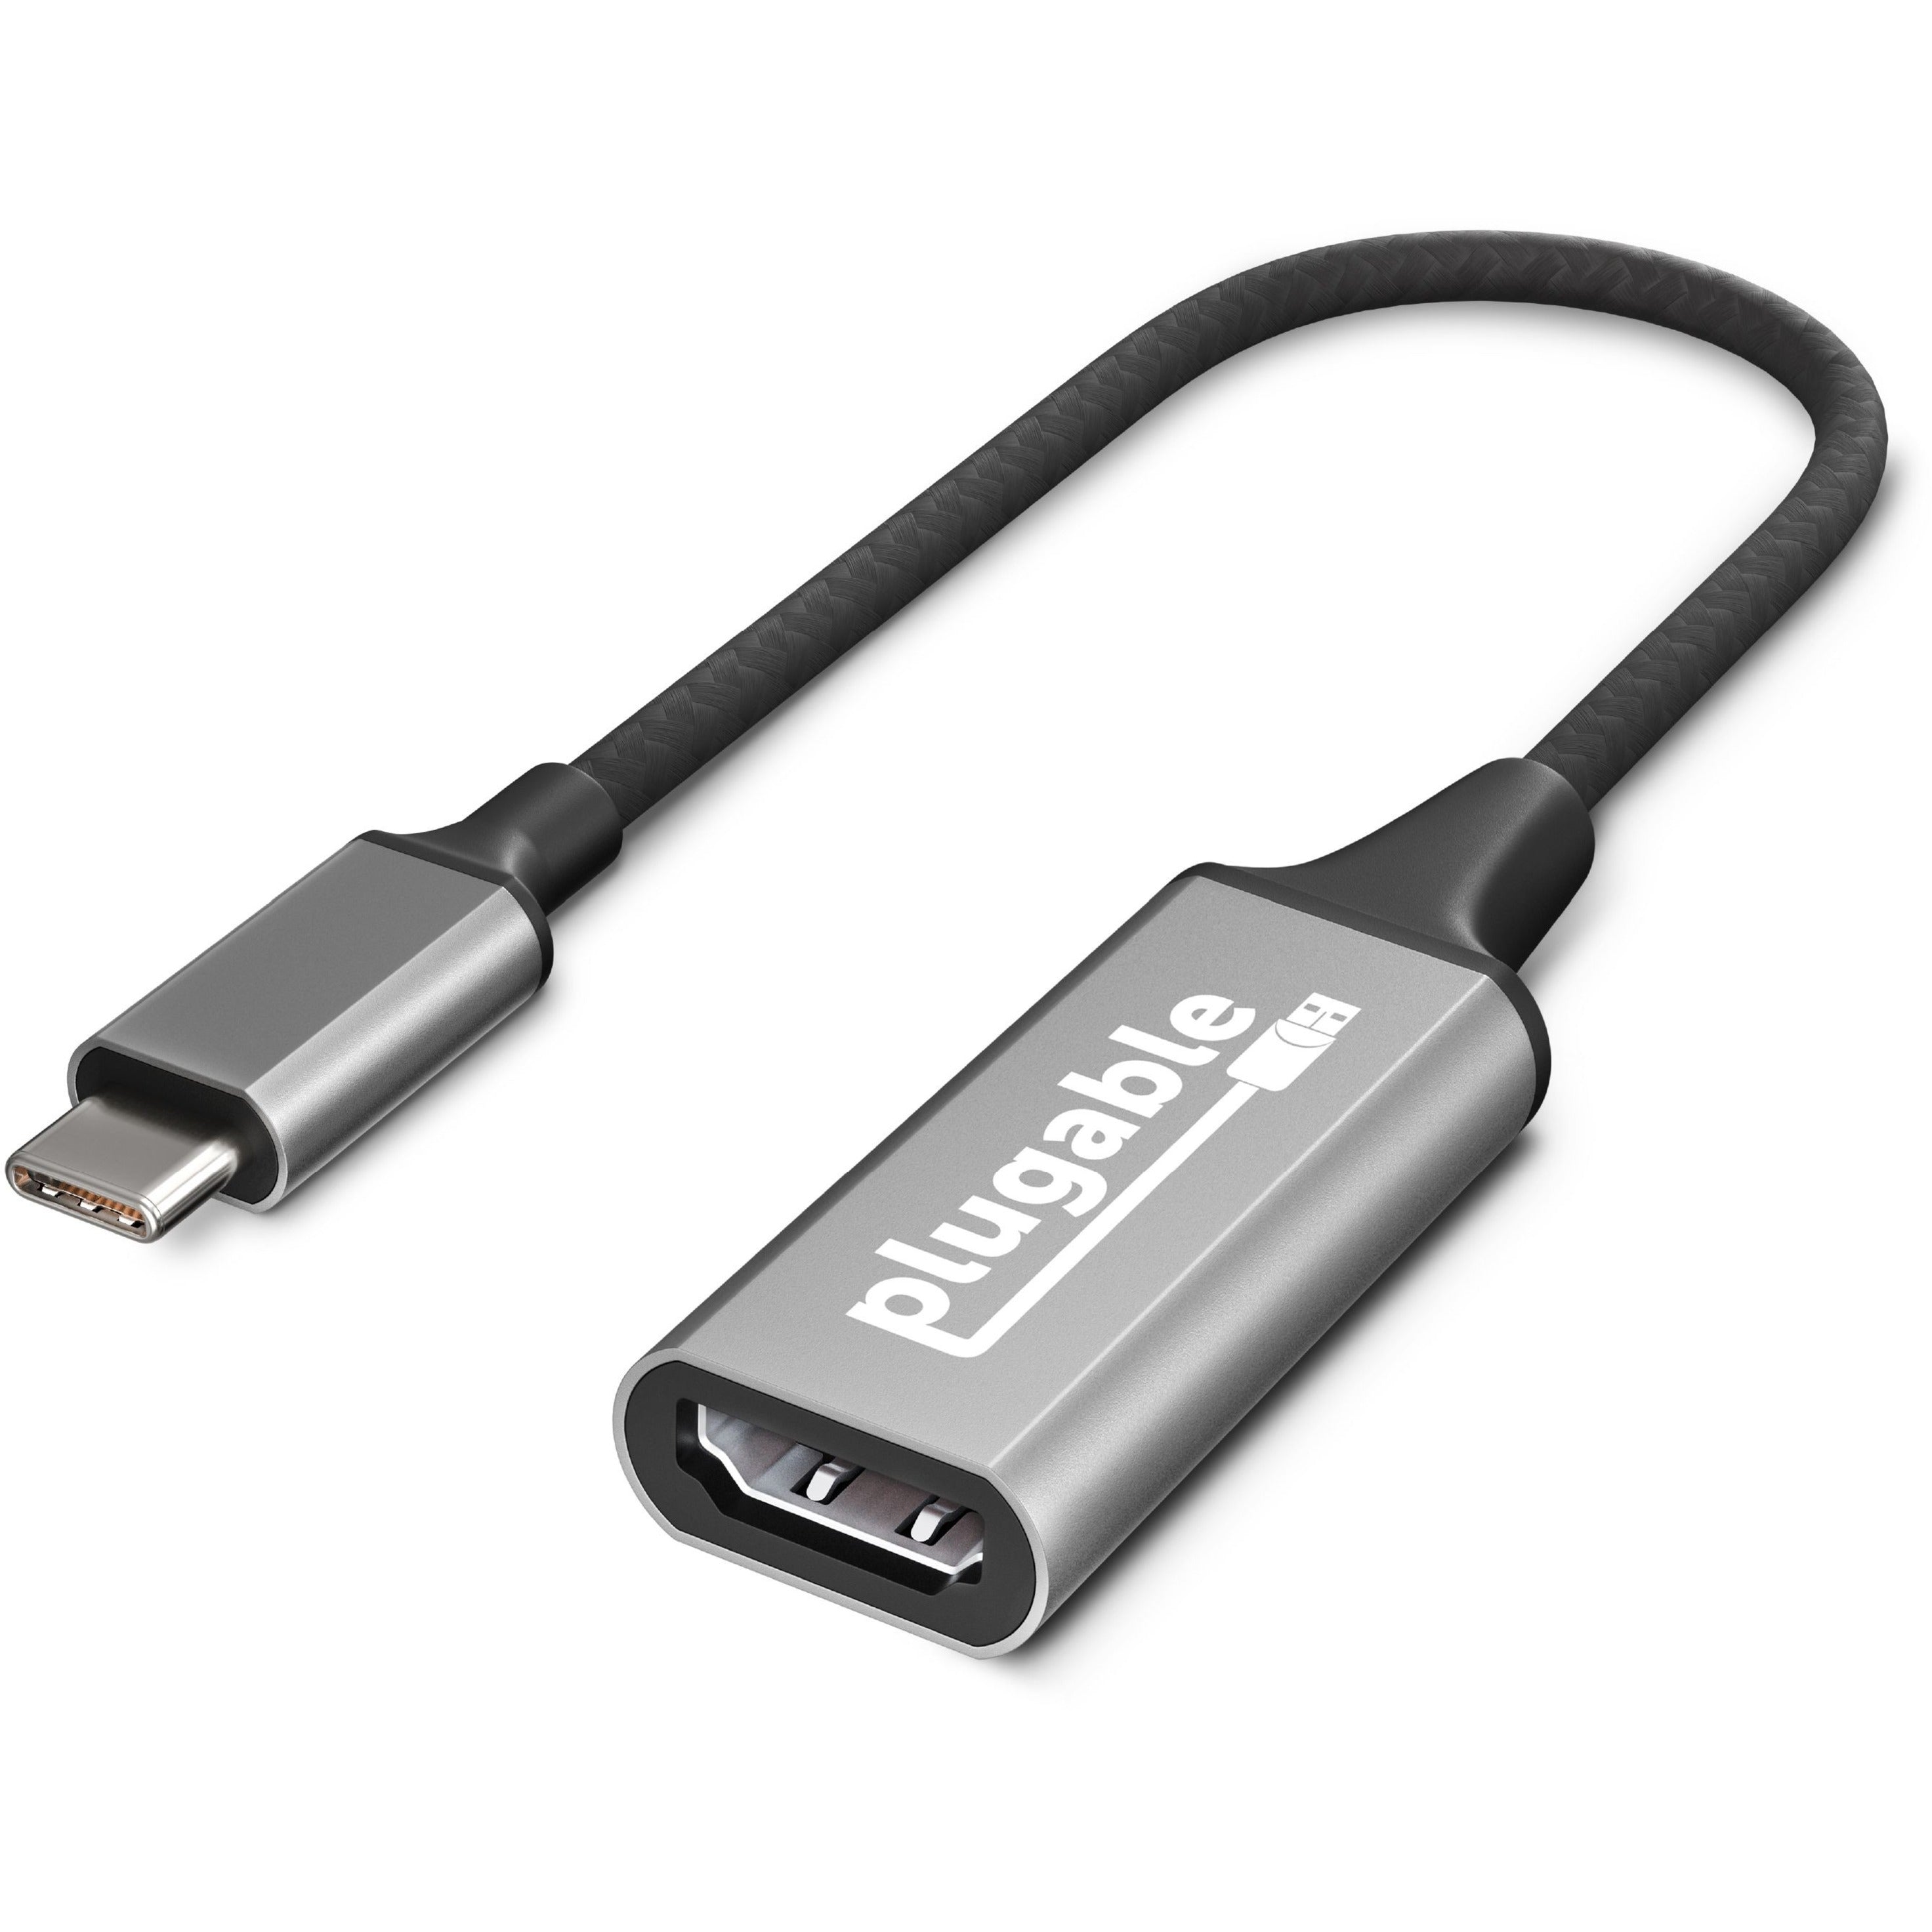 Plugable USBC-HDMI USB 3.1 Type-C to HDMI 2.0 Adapter, Plug and Play, 3840 x 2160 Maximum Resolution Supported